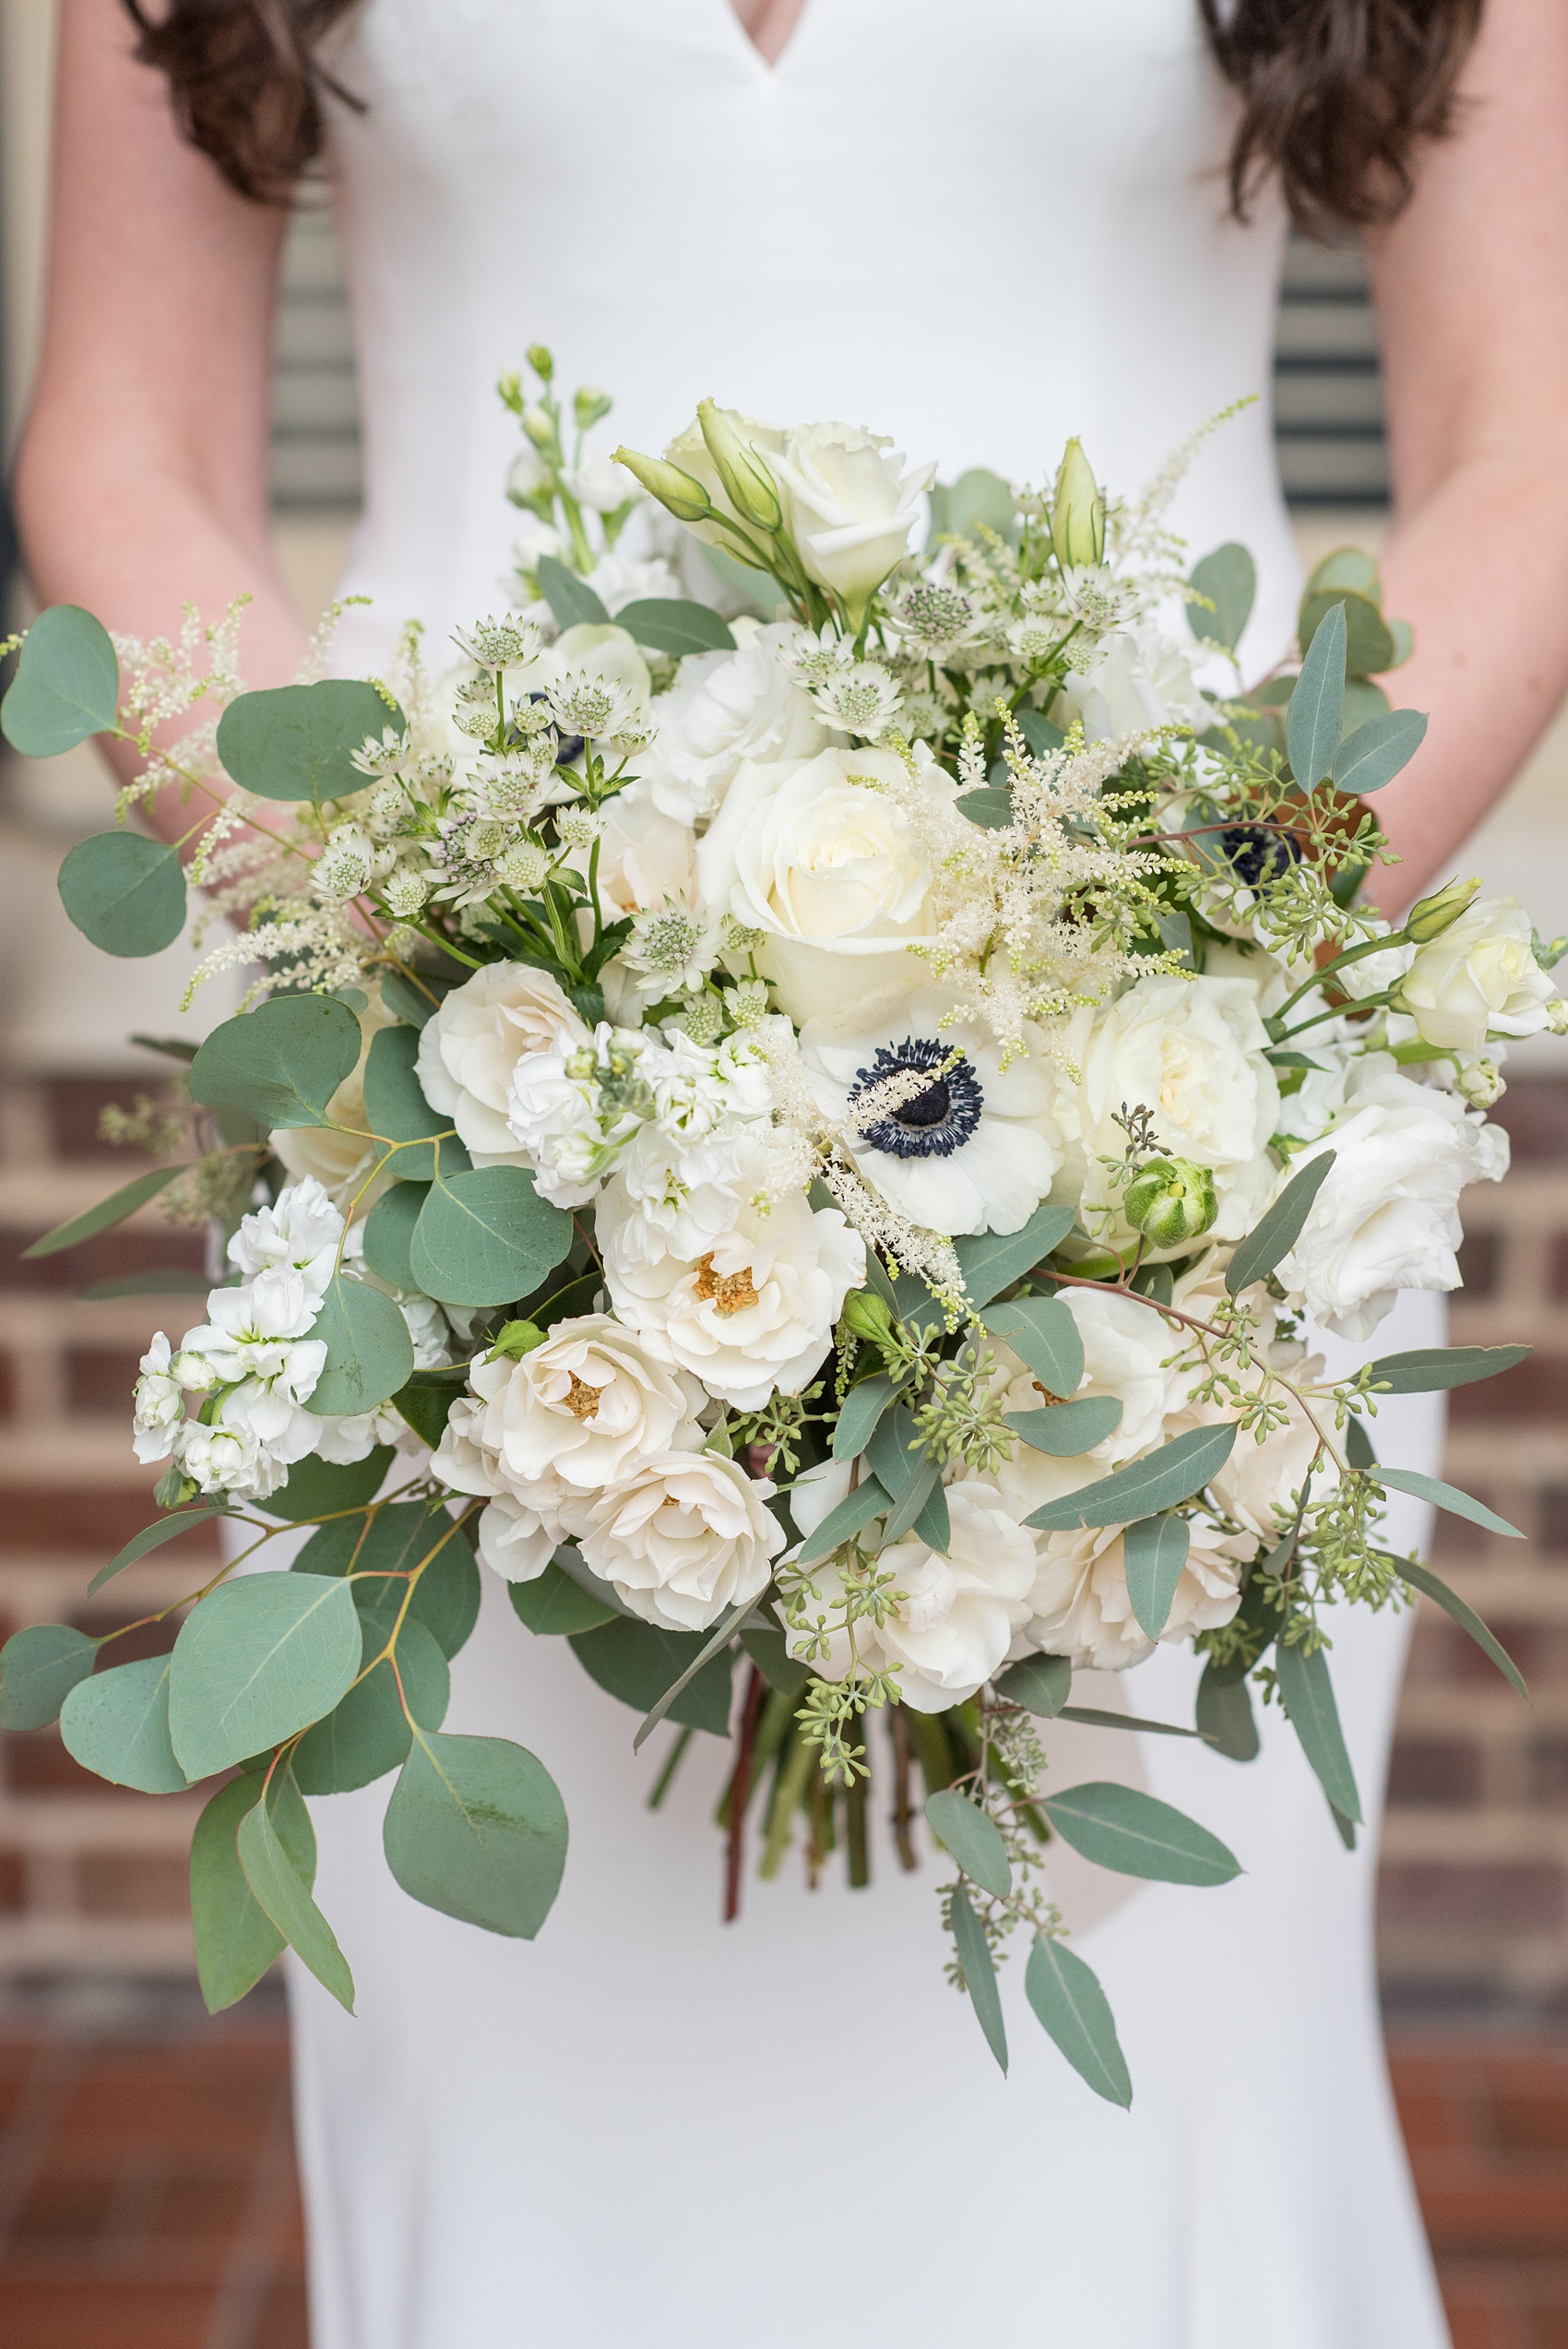 Photos of a fall wedding at The Carolina Inn, in Chapel Hill North Carolina, by Mikkel Paige Photography. This event venue doubles as a hotel for guests, who can enjoy a reception indoors or outdoors. The bride’s bouquet was white with eucalyptus greenery, including lisanthus, anemones with purple centers, and roses by The Flower Cupboard. Click through to see inspiration from the entire wedding! Planner: @asouthernsoiree #thecarolinainn #ChapelHillWeddings #MikkelPaige #bridalbouquet